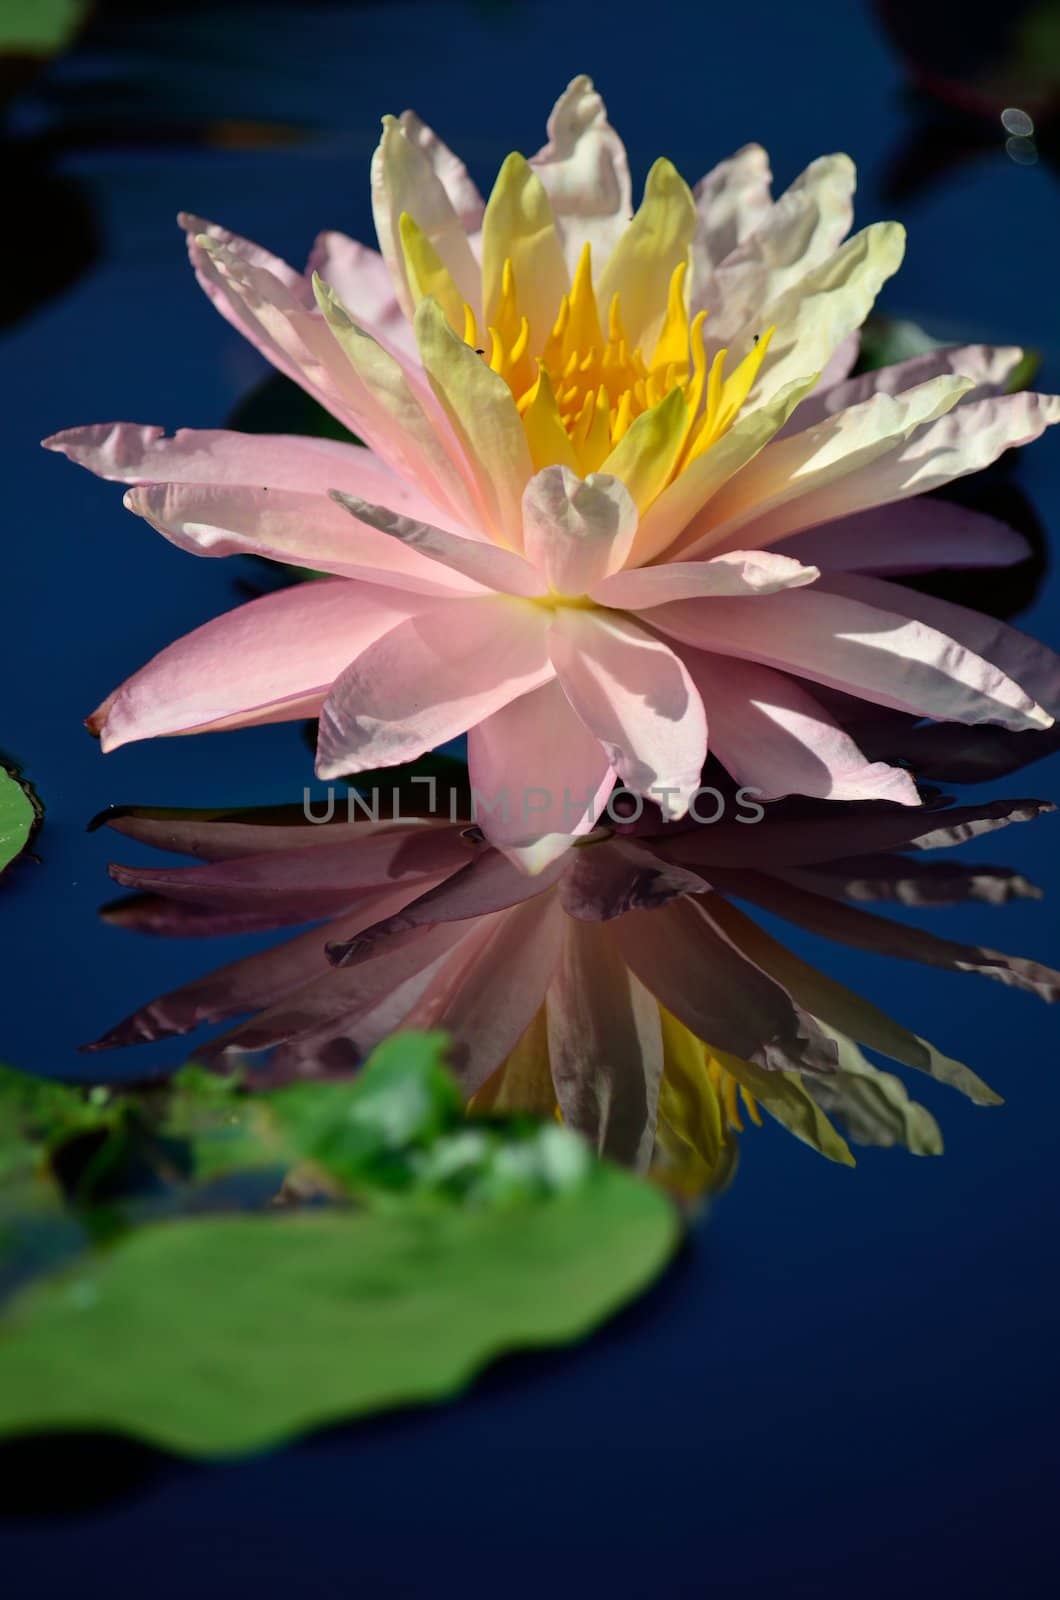 A pink water lily with a yellow center in full bloom